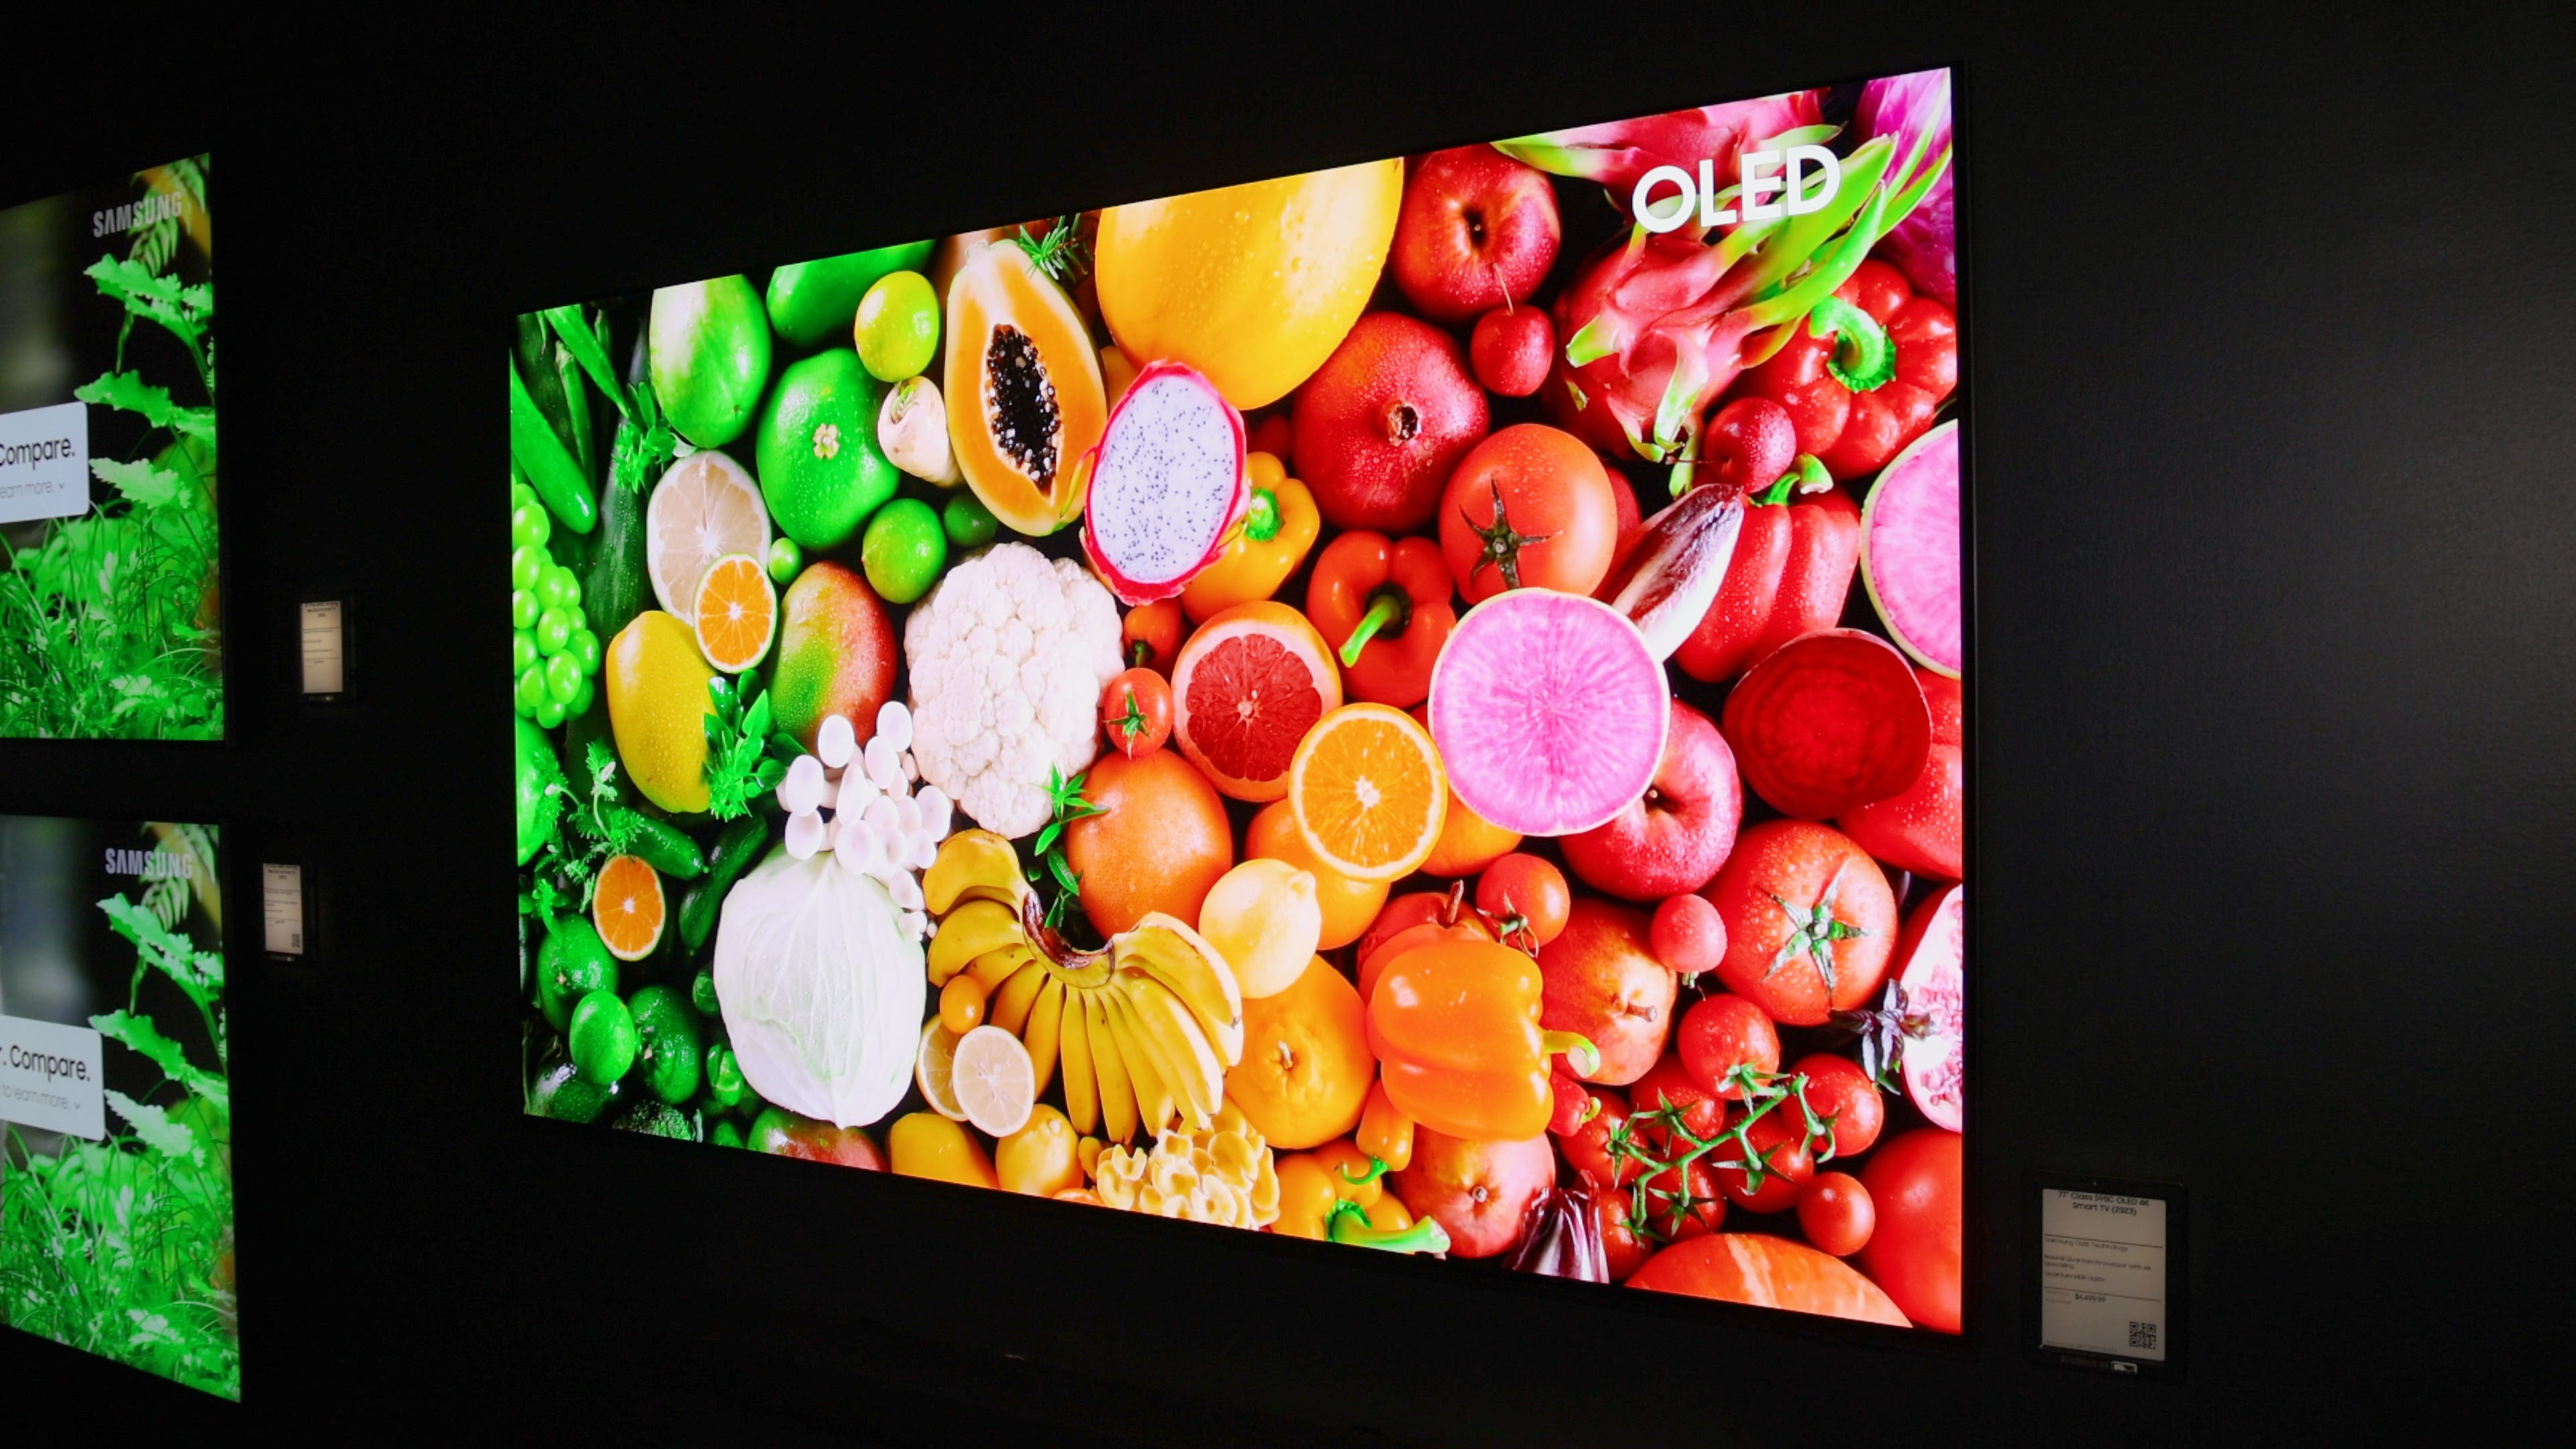 The Hisense 110UX Could Be the Brightest TV Yet - Video - CNET